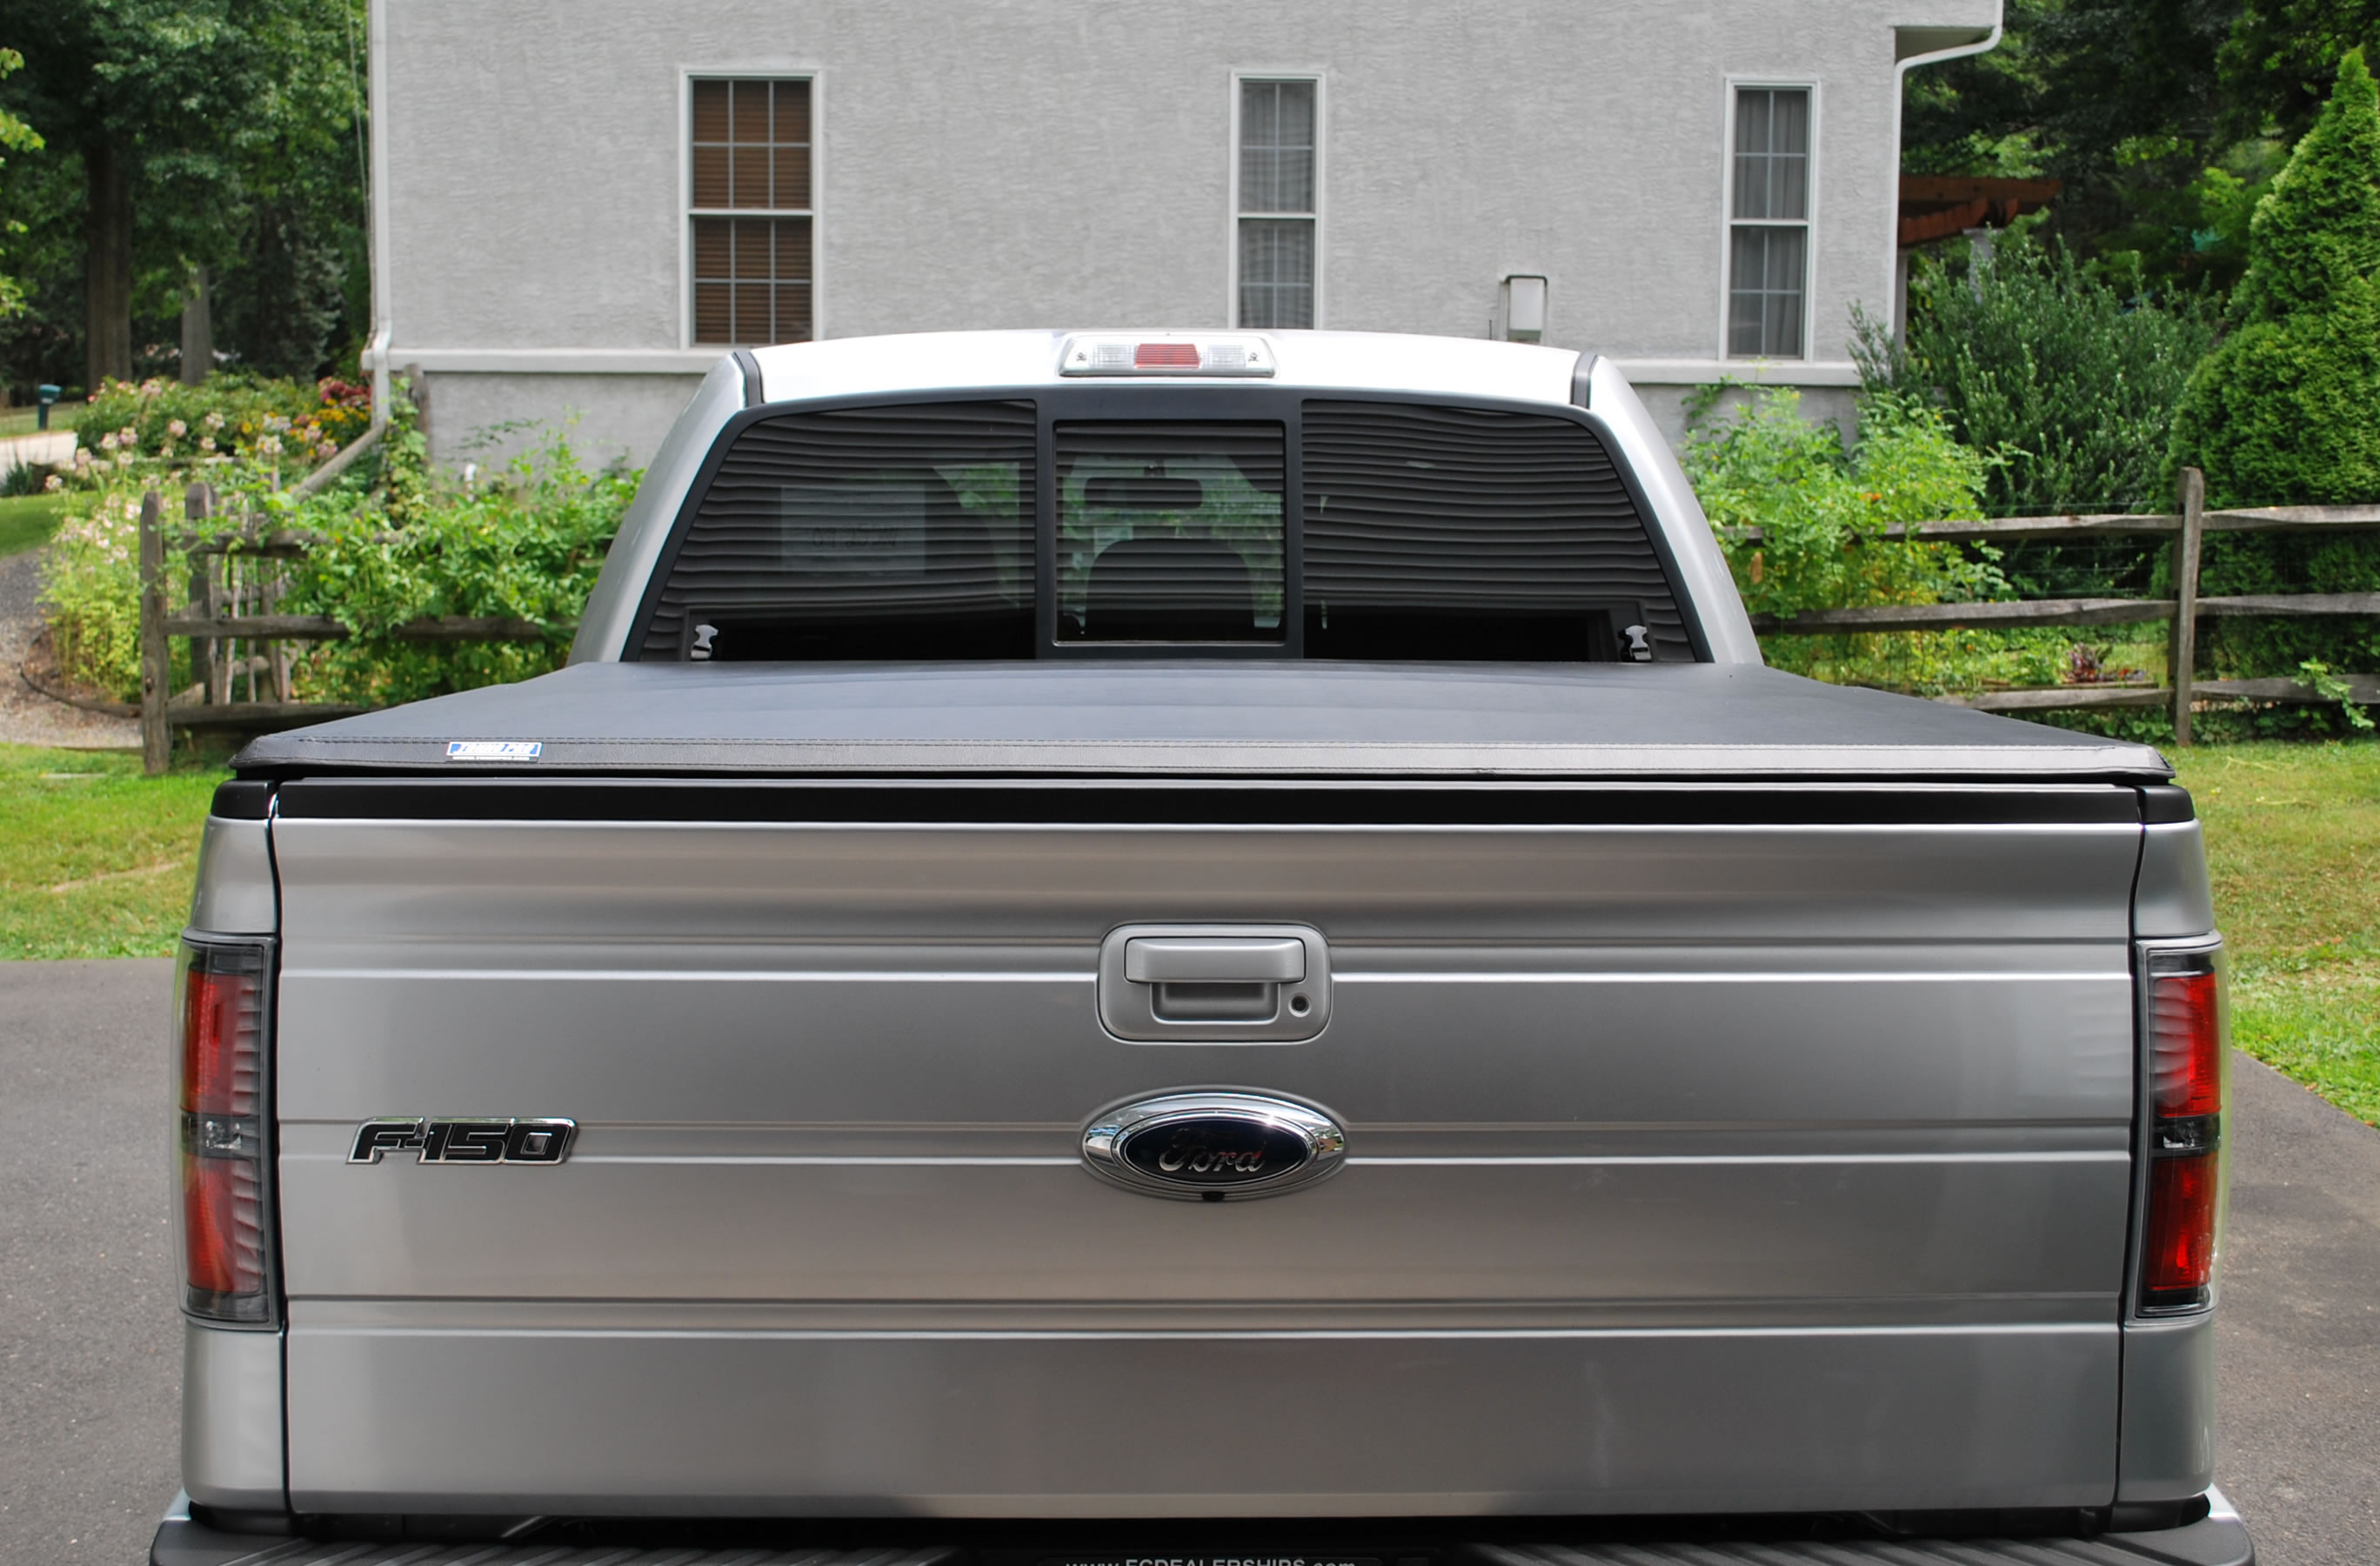 F150 Bed Covers